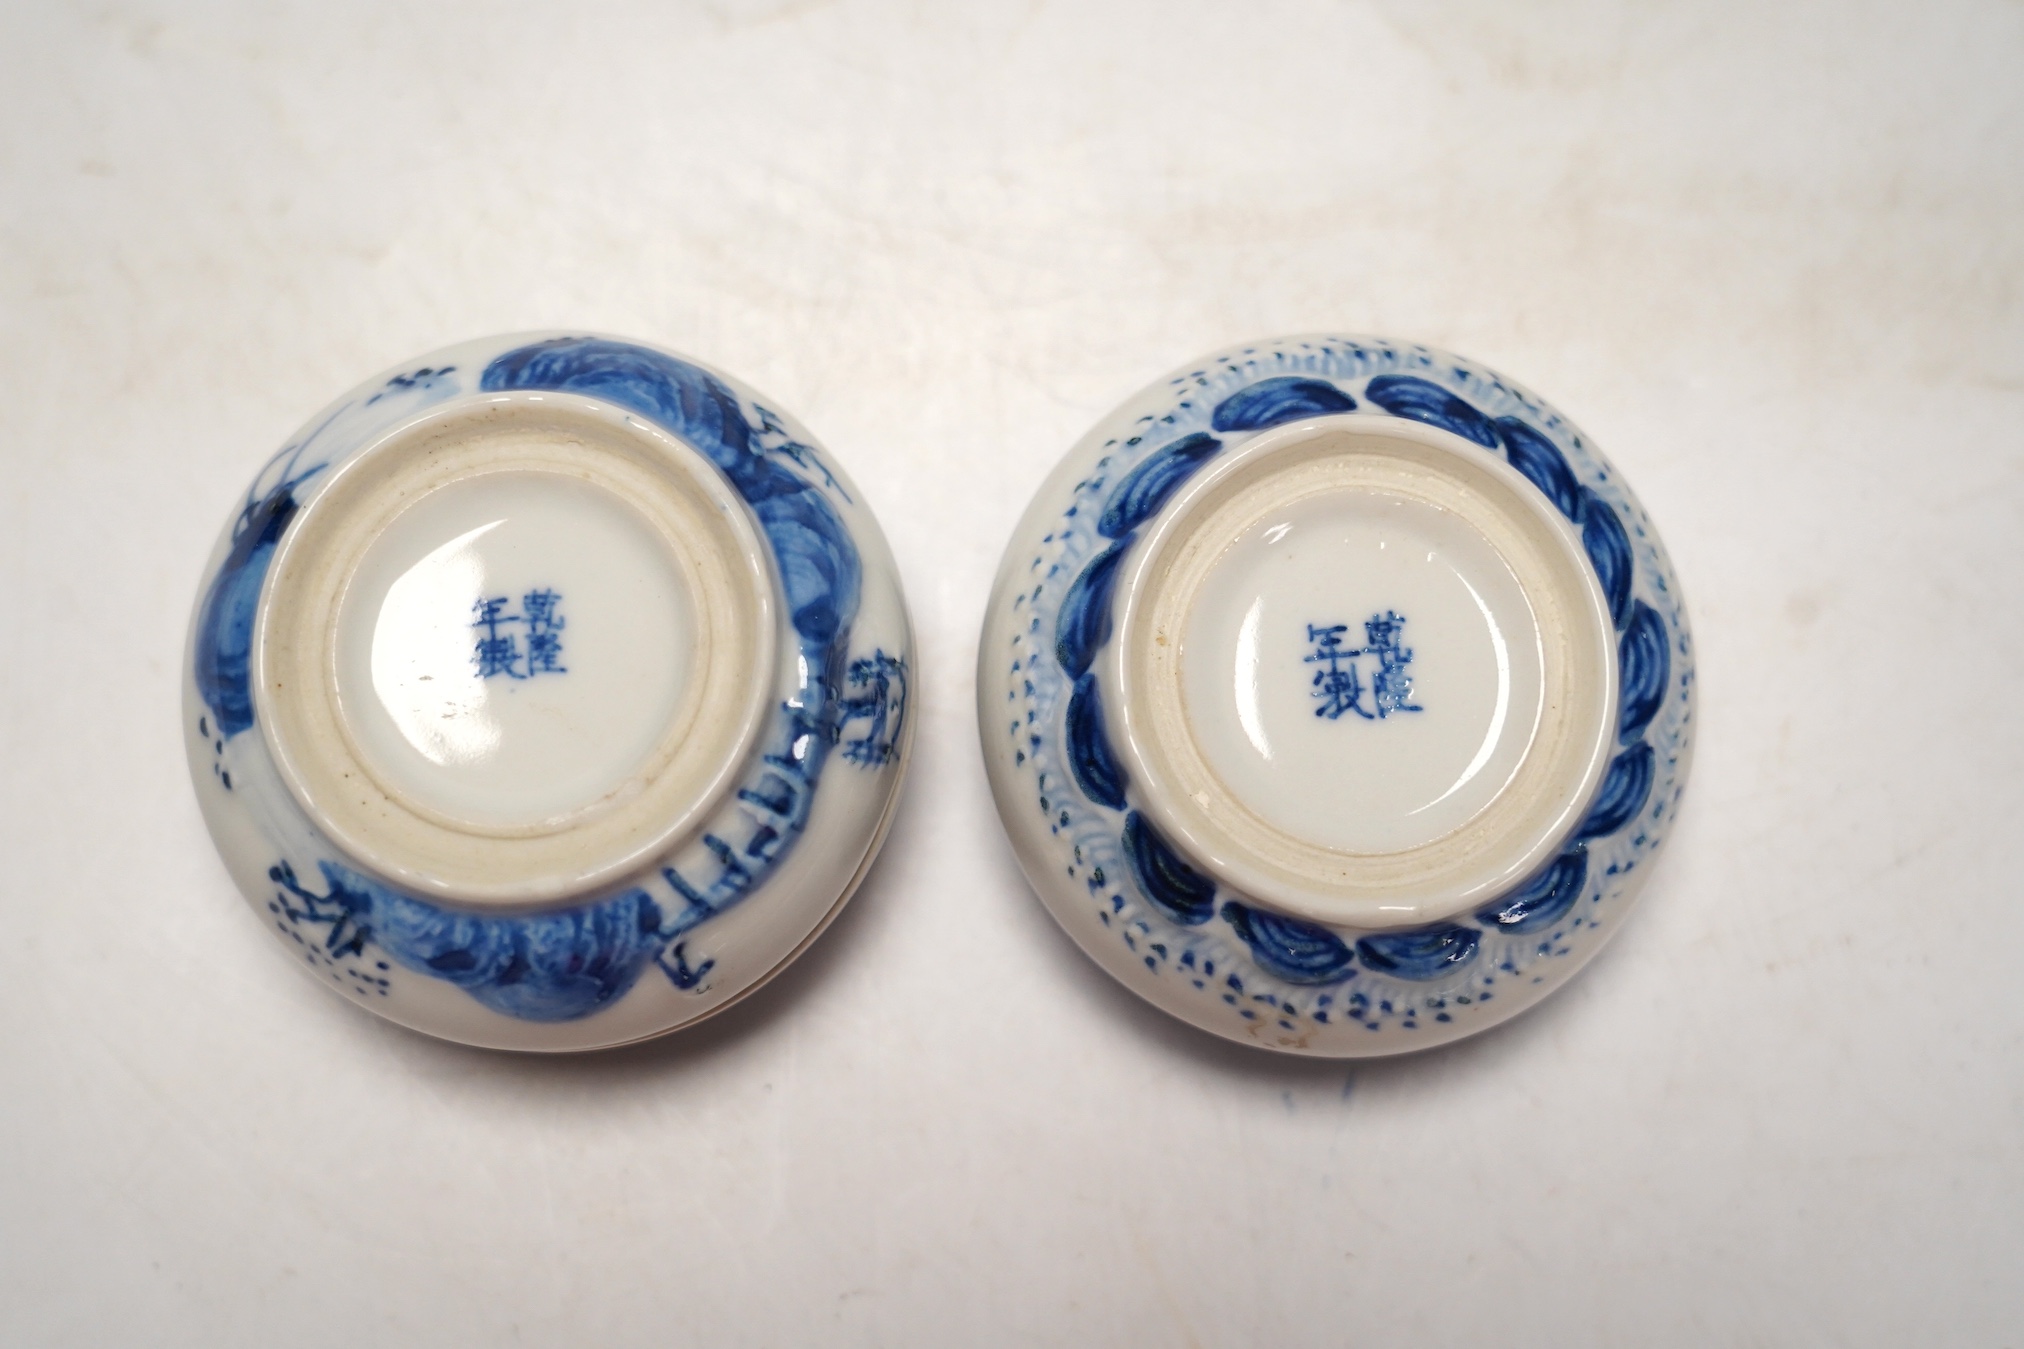 Chinese blue and white ceramics comprising crackle glaze vases and circular seal pots (4). Condition - fair to good, a few minor chips